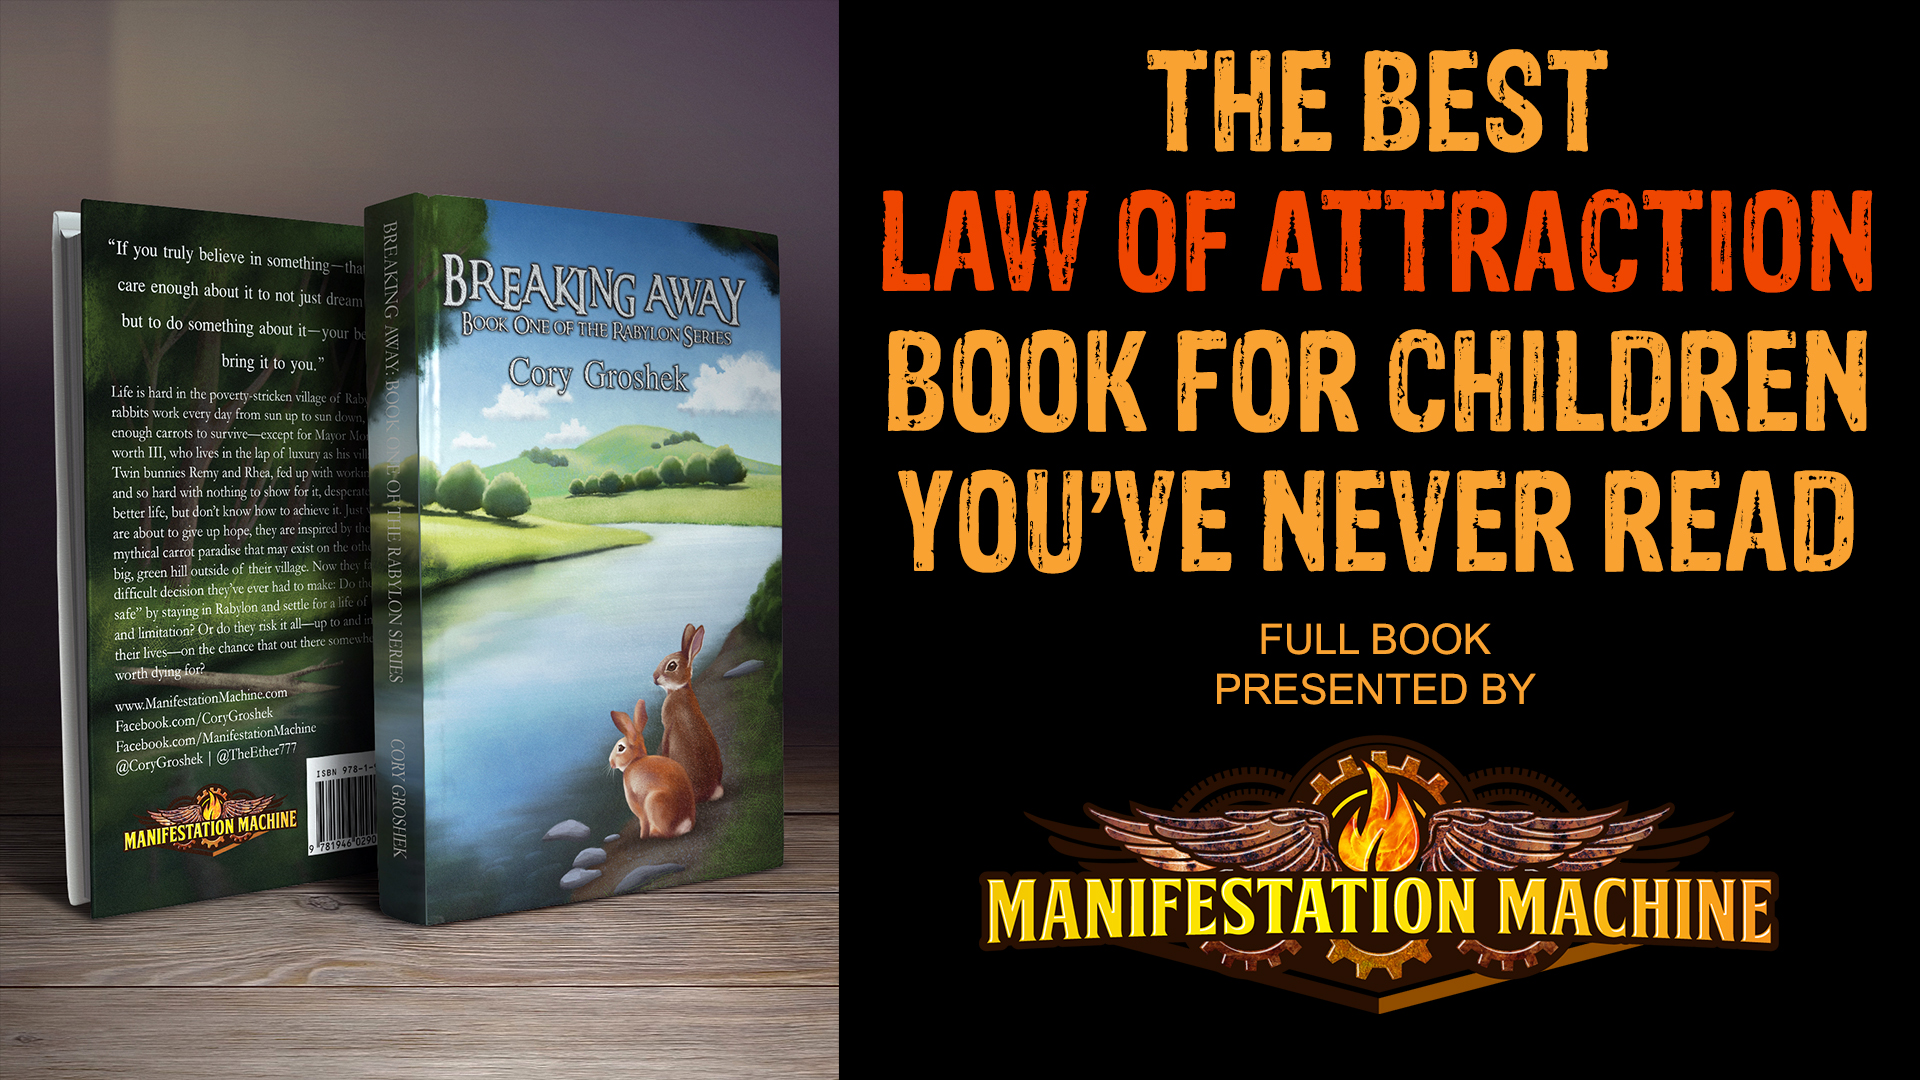 The Best Law of Attraction Book for Children You've Never Read Full Book